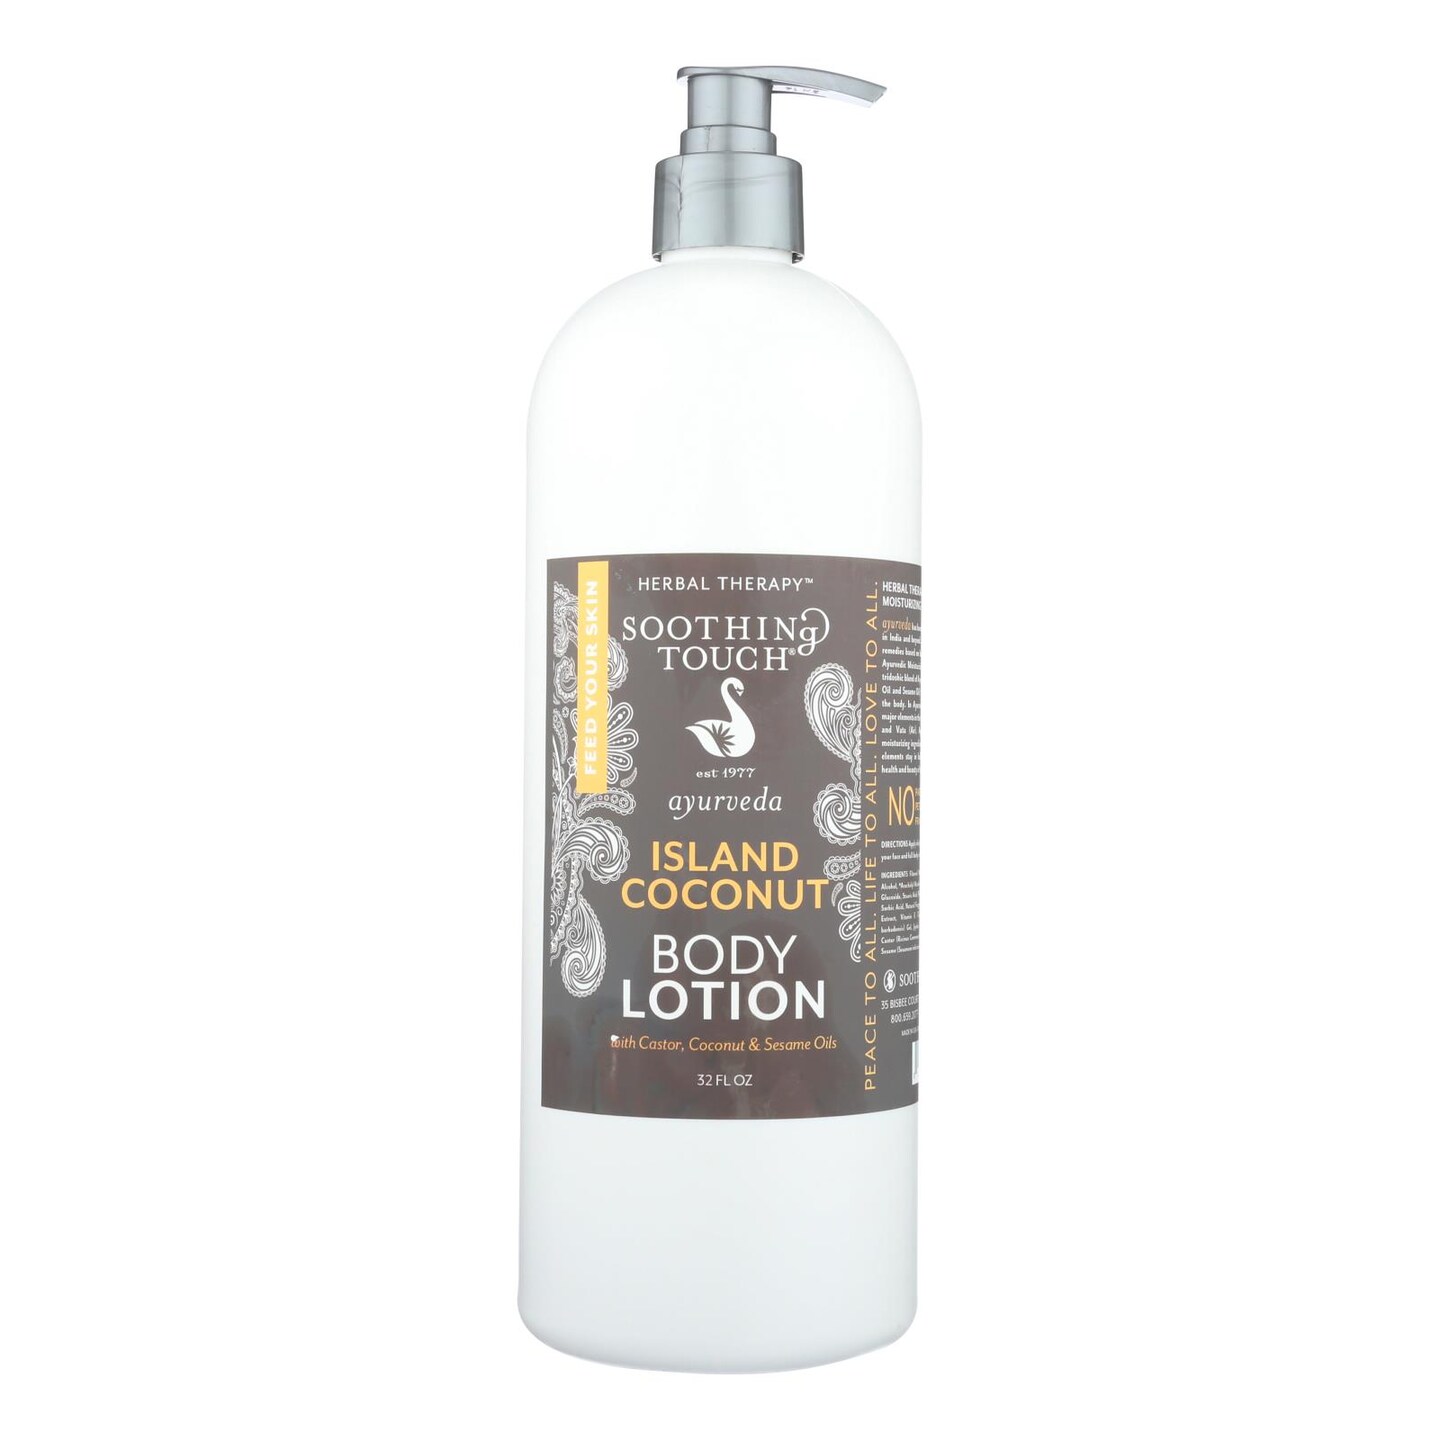 Soothing Touch Island Coconut Body Lotion - 32 oz